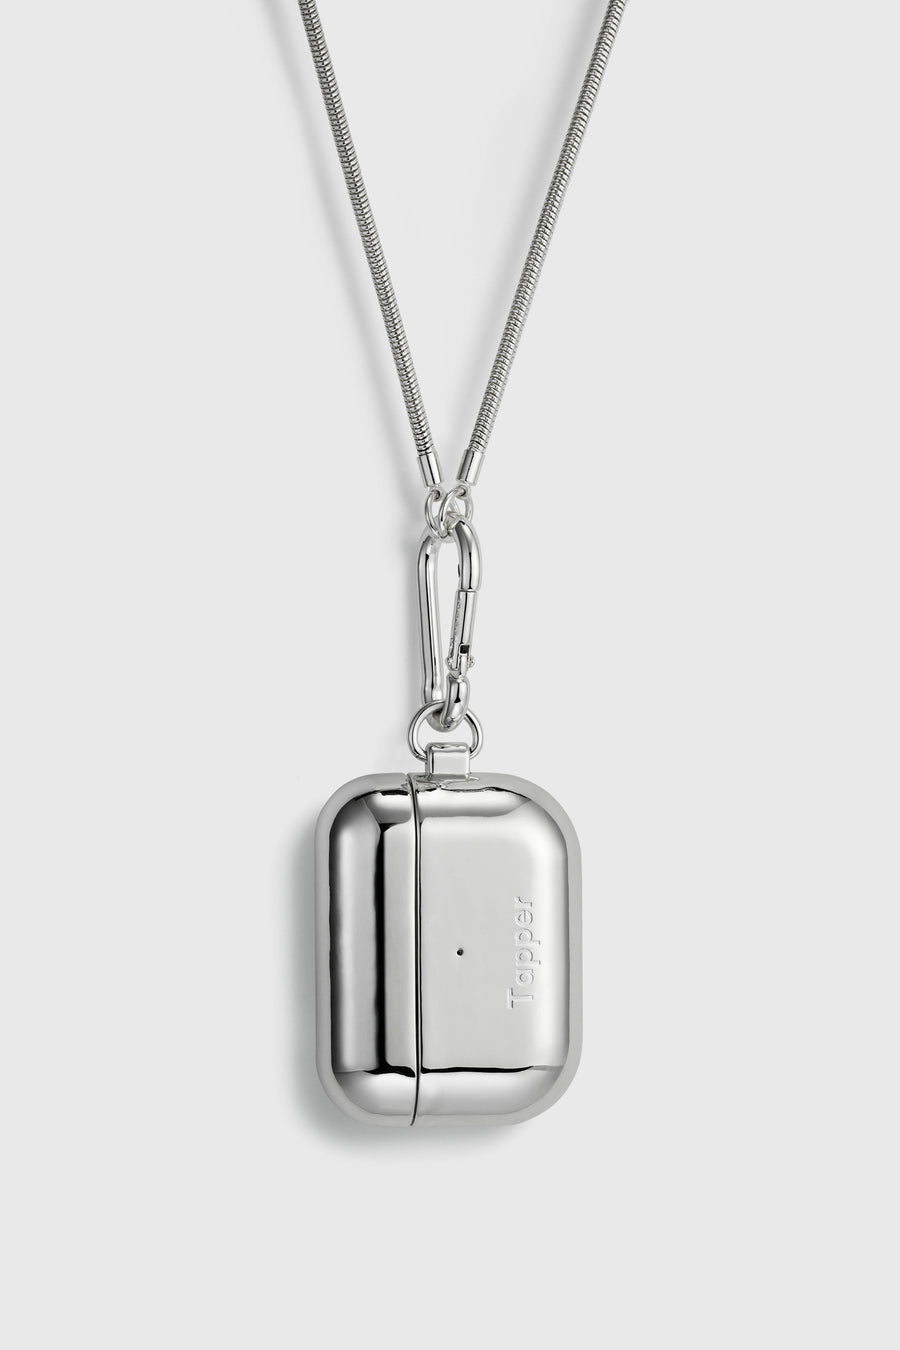 Tapper's real 925 silver plated original metal neck case tech jewelry protects and keeps your Apple AirPods Pro close at hand. The luxurious, elevated and accessible neck case plated in precious metals steps up your AirPods Pro jewellery game. Worried about losing your AirPods? Detachable snake chain and carabiner for convenient and hassle-free safekeeping around your neck. The next must-have accessory crafted for ultimate luxury. Compatible with AirPods Pro. Designed in Sweden. Free Express Shipping.